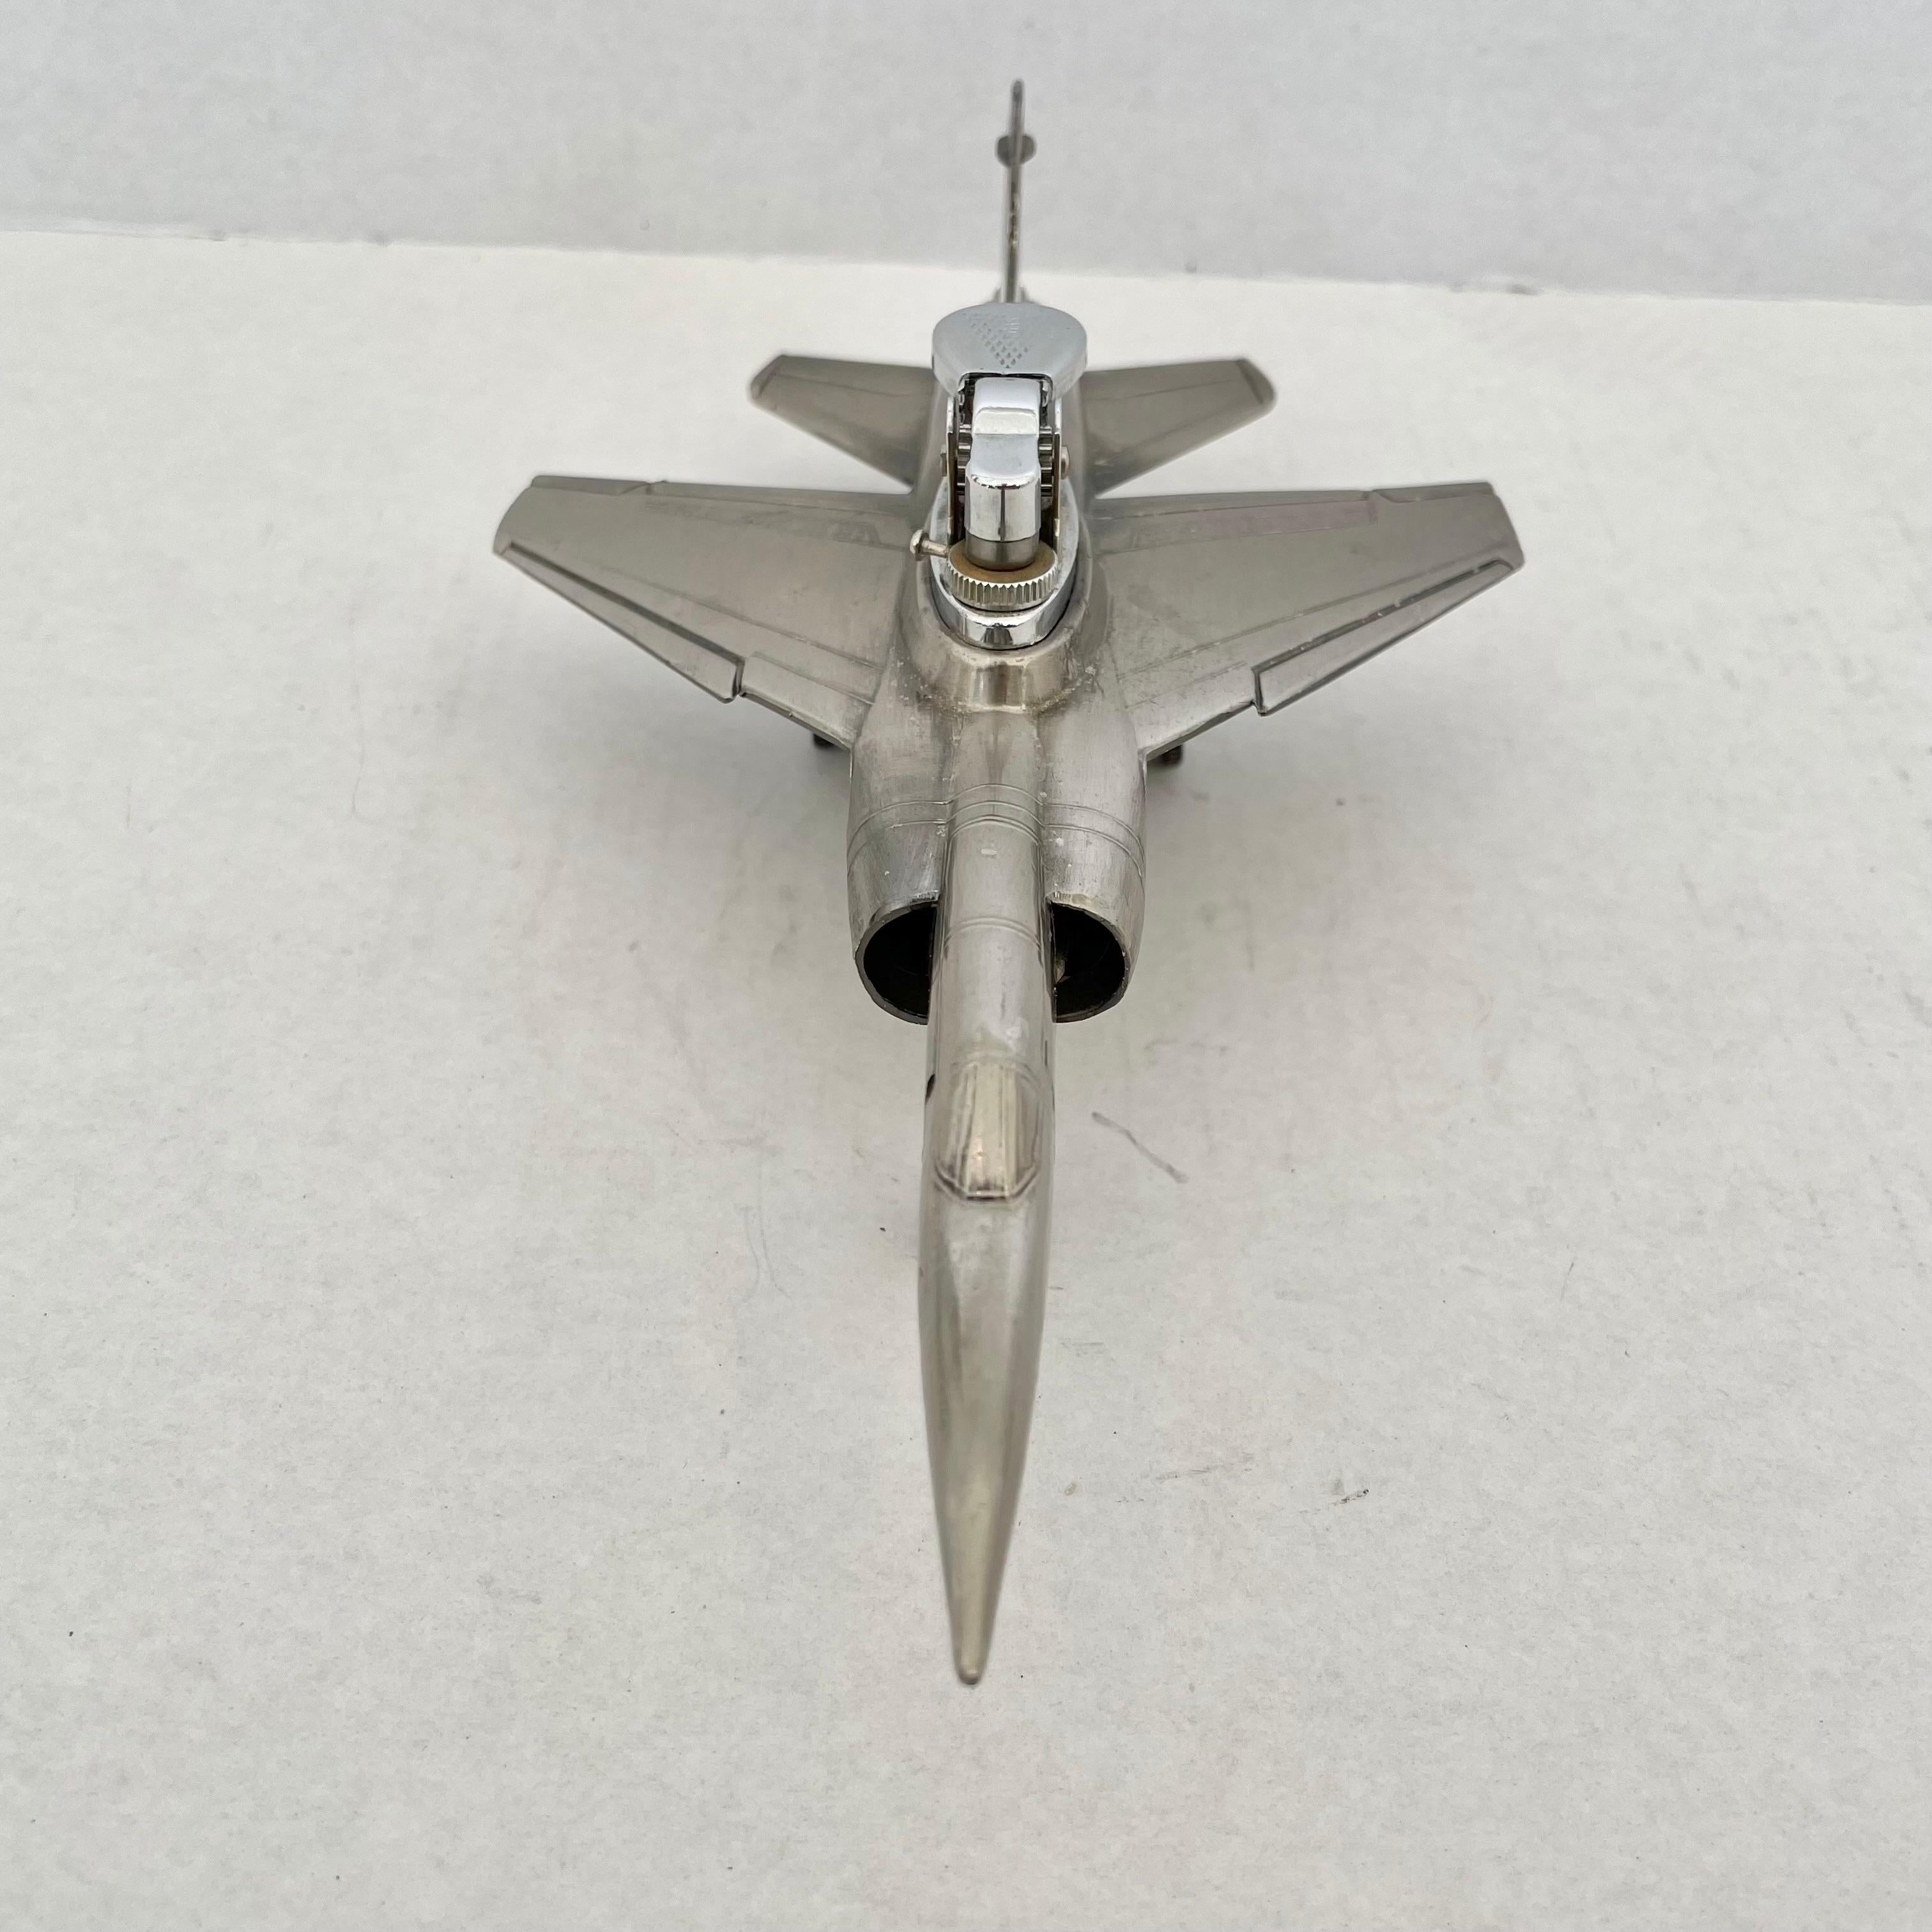 Cool vintage table lighter in the shape of a F1 Mirage fighter jet. Made in Japan, 1980s. This piece has great balance and details. Cool tobacco accessory and conversation piece. Working lighter. Good vintage condition.